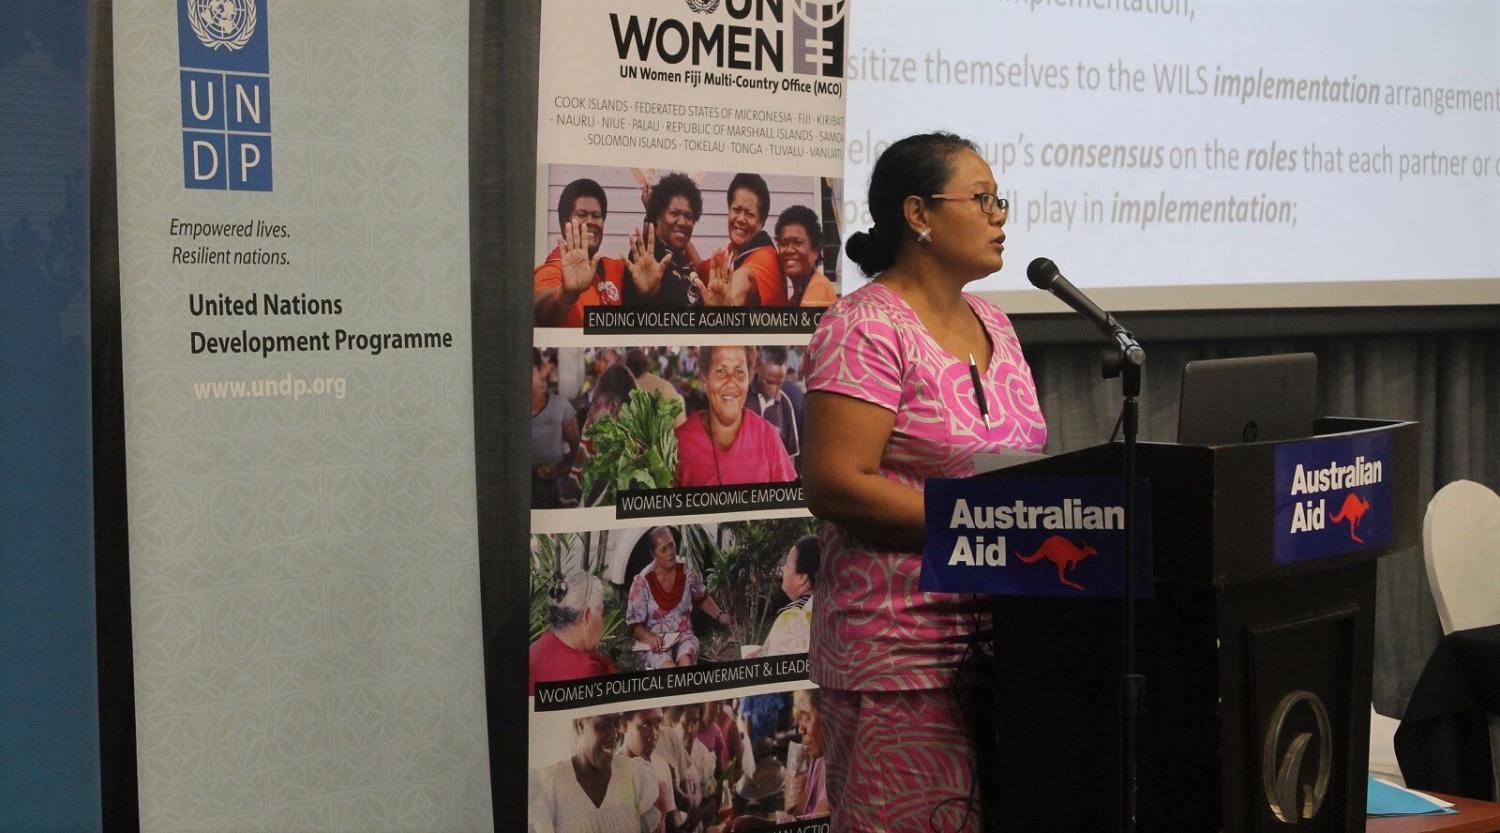 Launch of the Women in Leadership in Samoa Project, 4 April 2018 (Photo: Cherelle Fruean, UN Women Asia and the Pacific/Flickr)